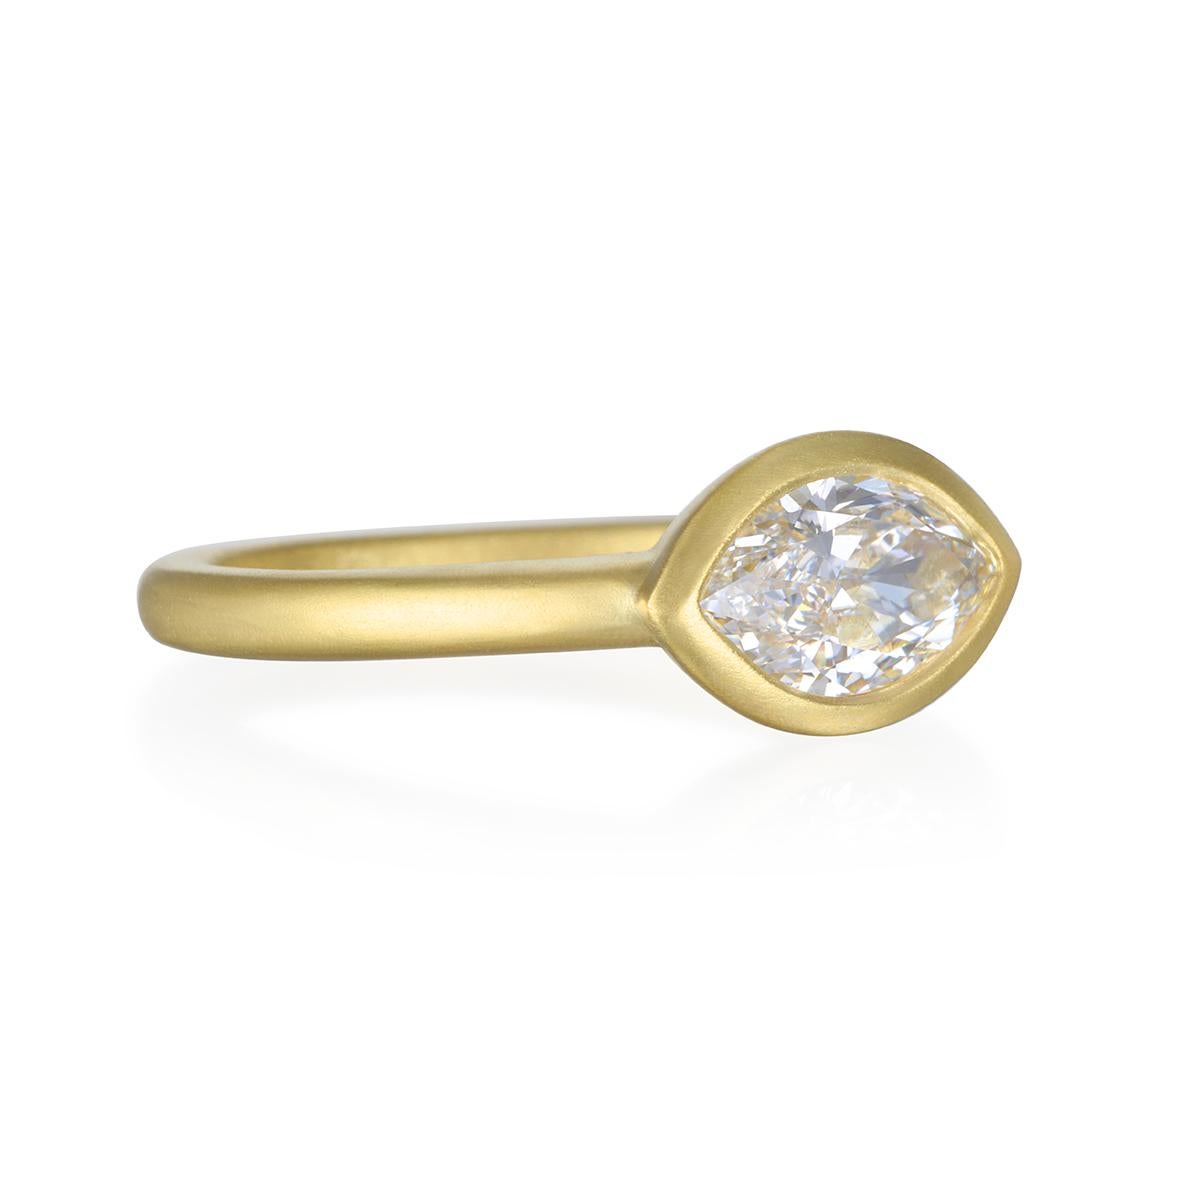 Make an impact with this dazzling modern marquise cut diamond ring. Perfect for stacking or for the modern bride.  Express your individuality with an original design  
handcrafted in 18k gold with a unique east-west bezel setting to highlight the